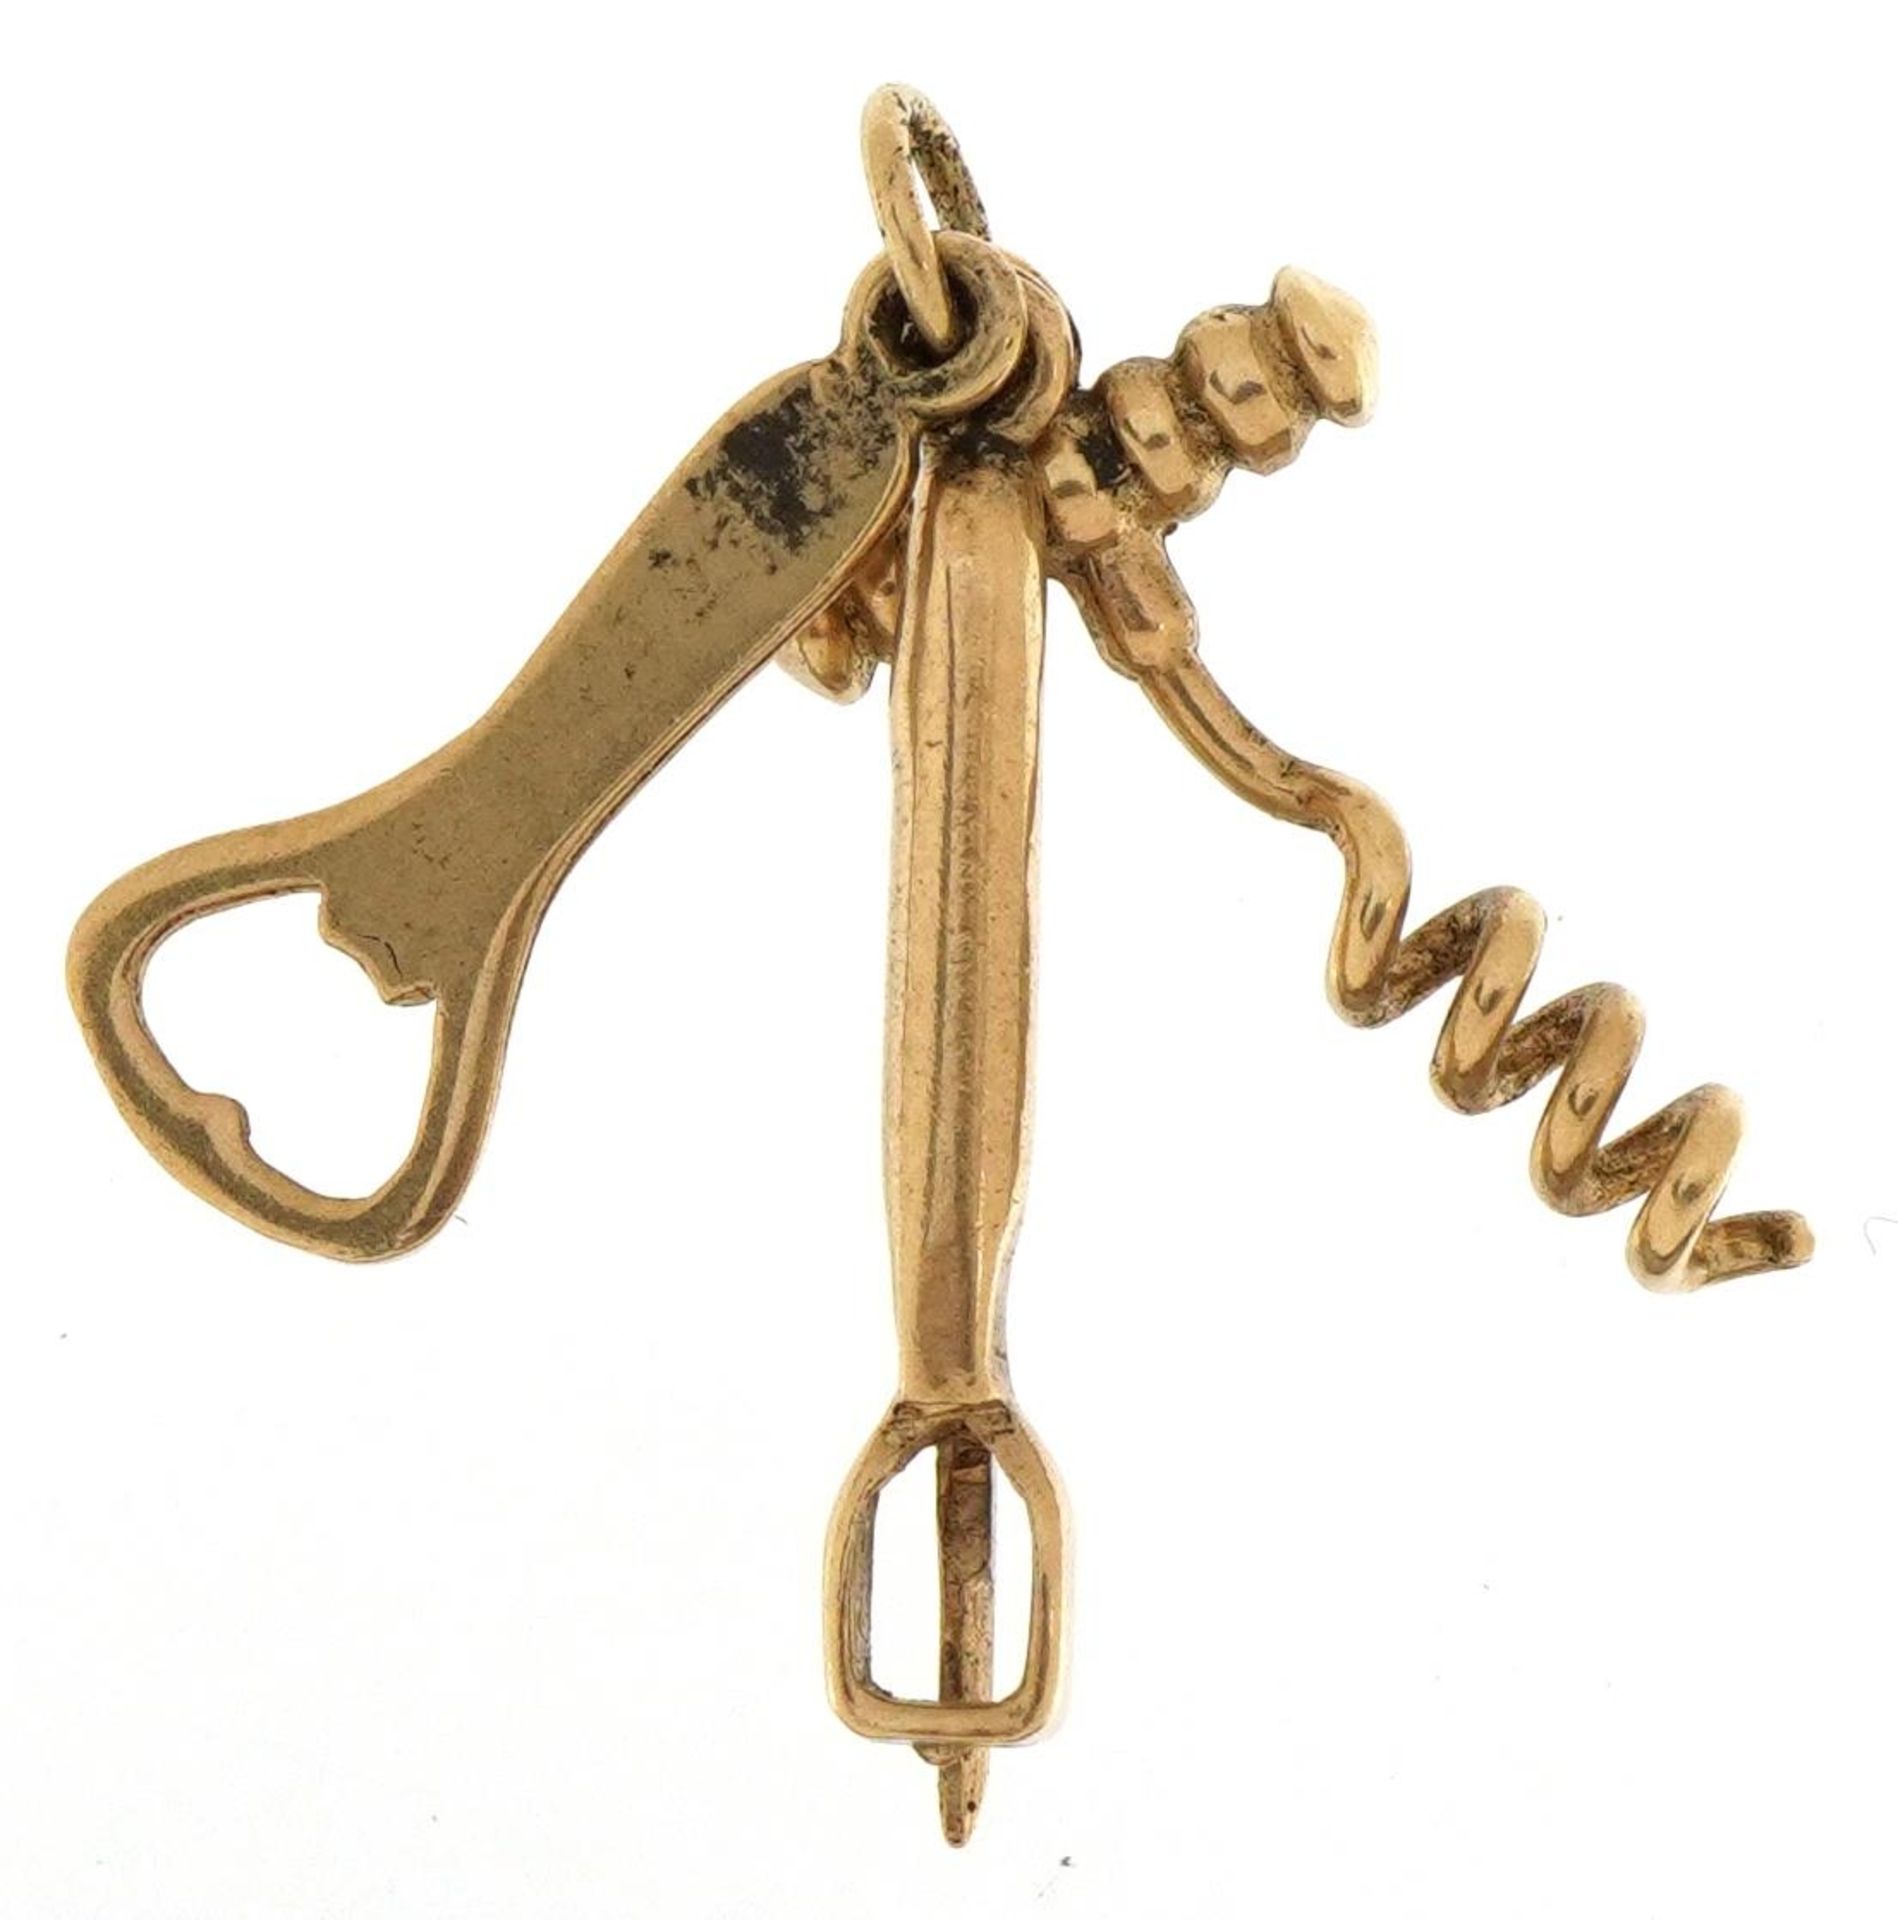 9ct gold bottle opener and corkscrew charm, 2.4cm high, 1.9g